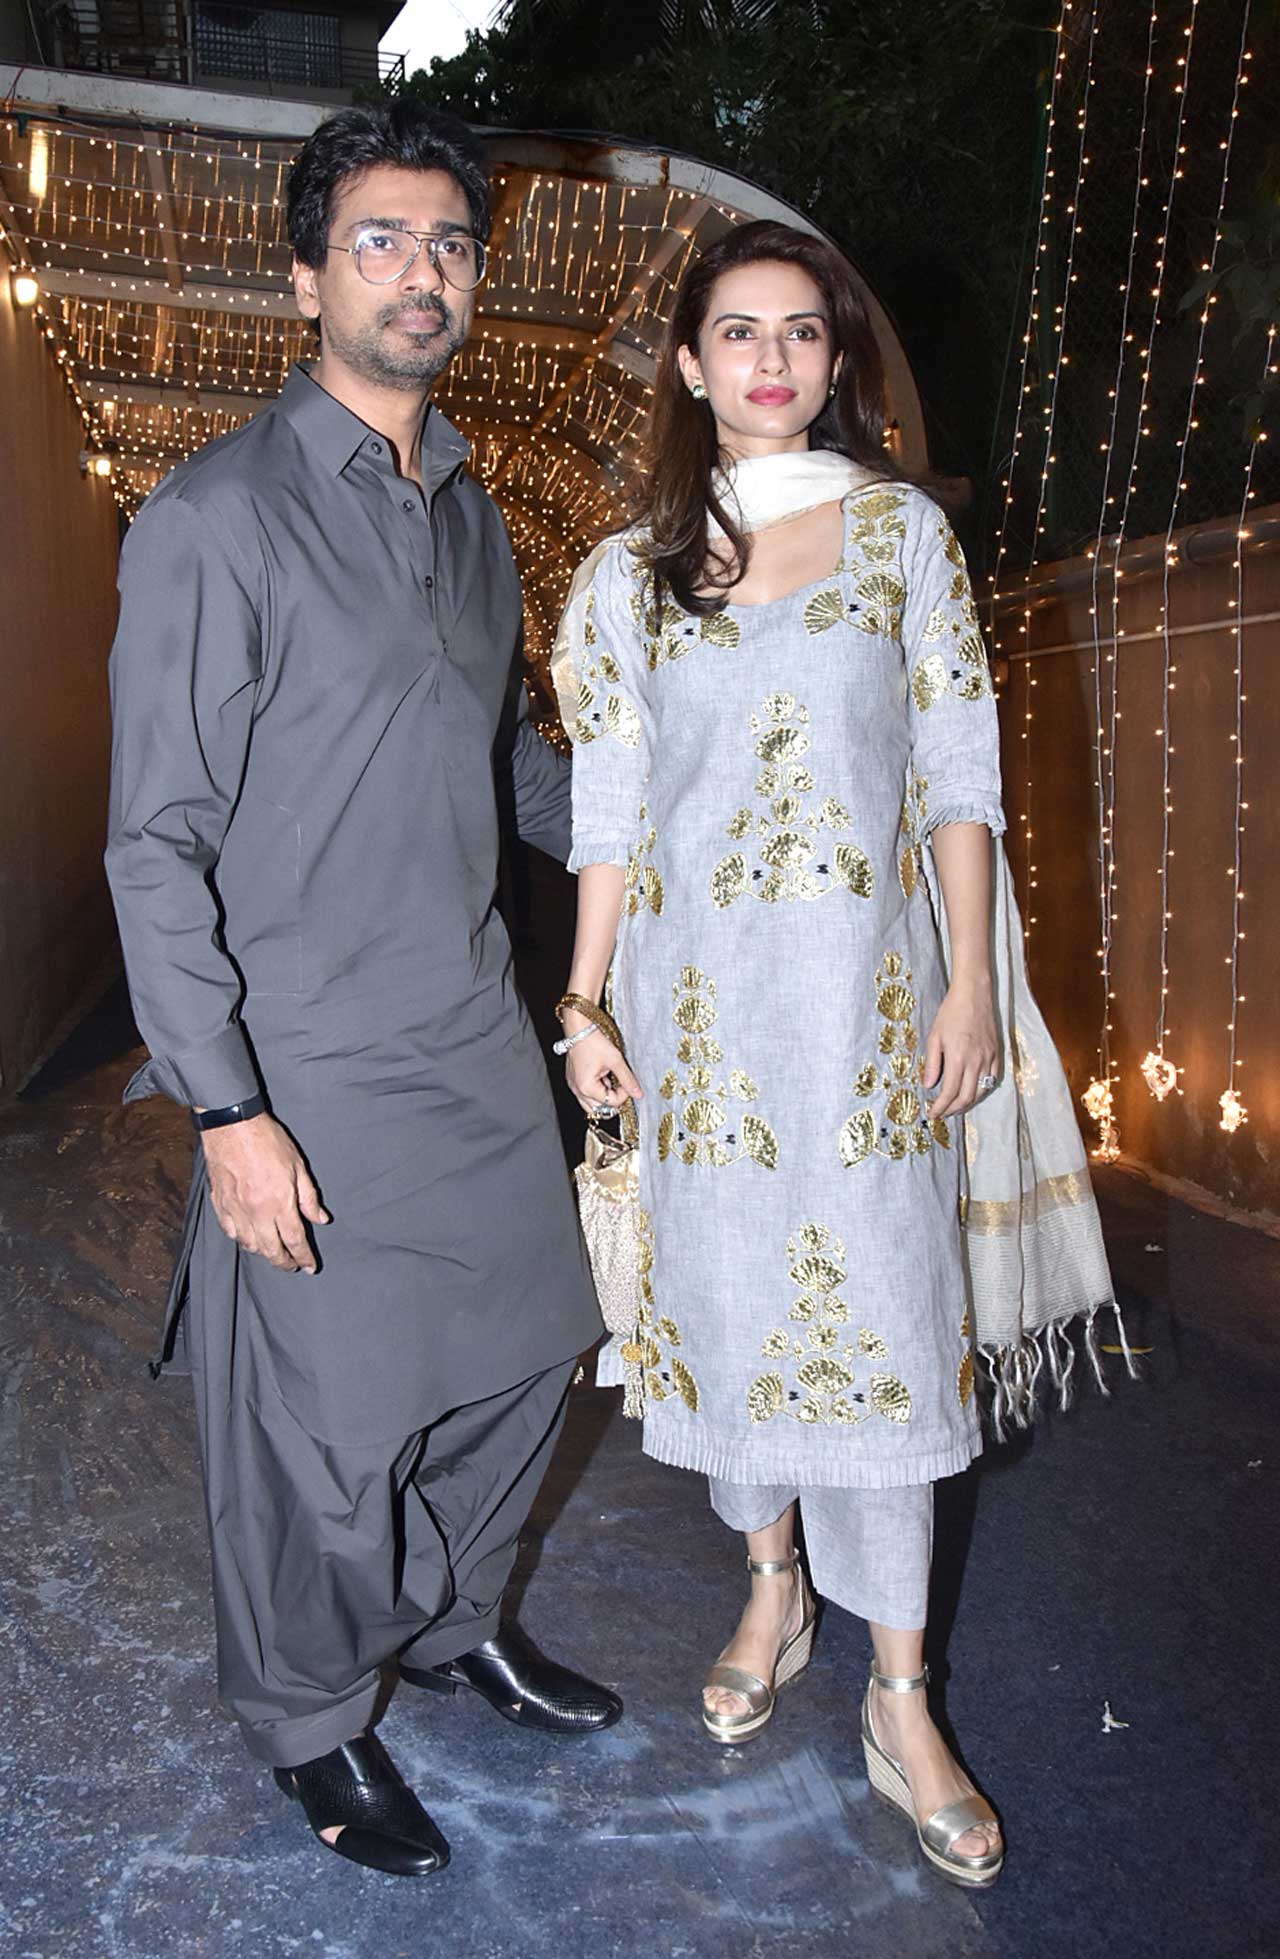 Nikhil Dwivedi and Gowri Pandit posed for the shutterbugs as they arrived at Priyaank K Sharma and Shaza Morani's wedding. Nikhil opted for a grey coloured pathani, whereas Gowri showed up in a pastel blue ethnic wear.